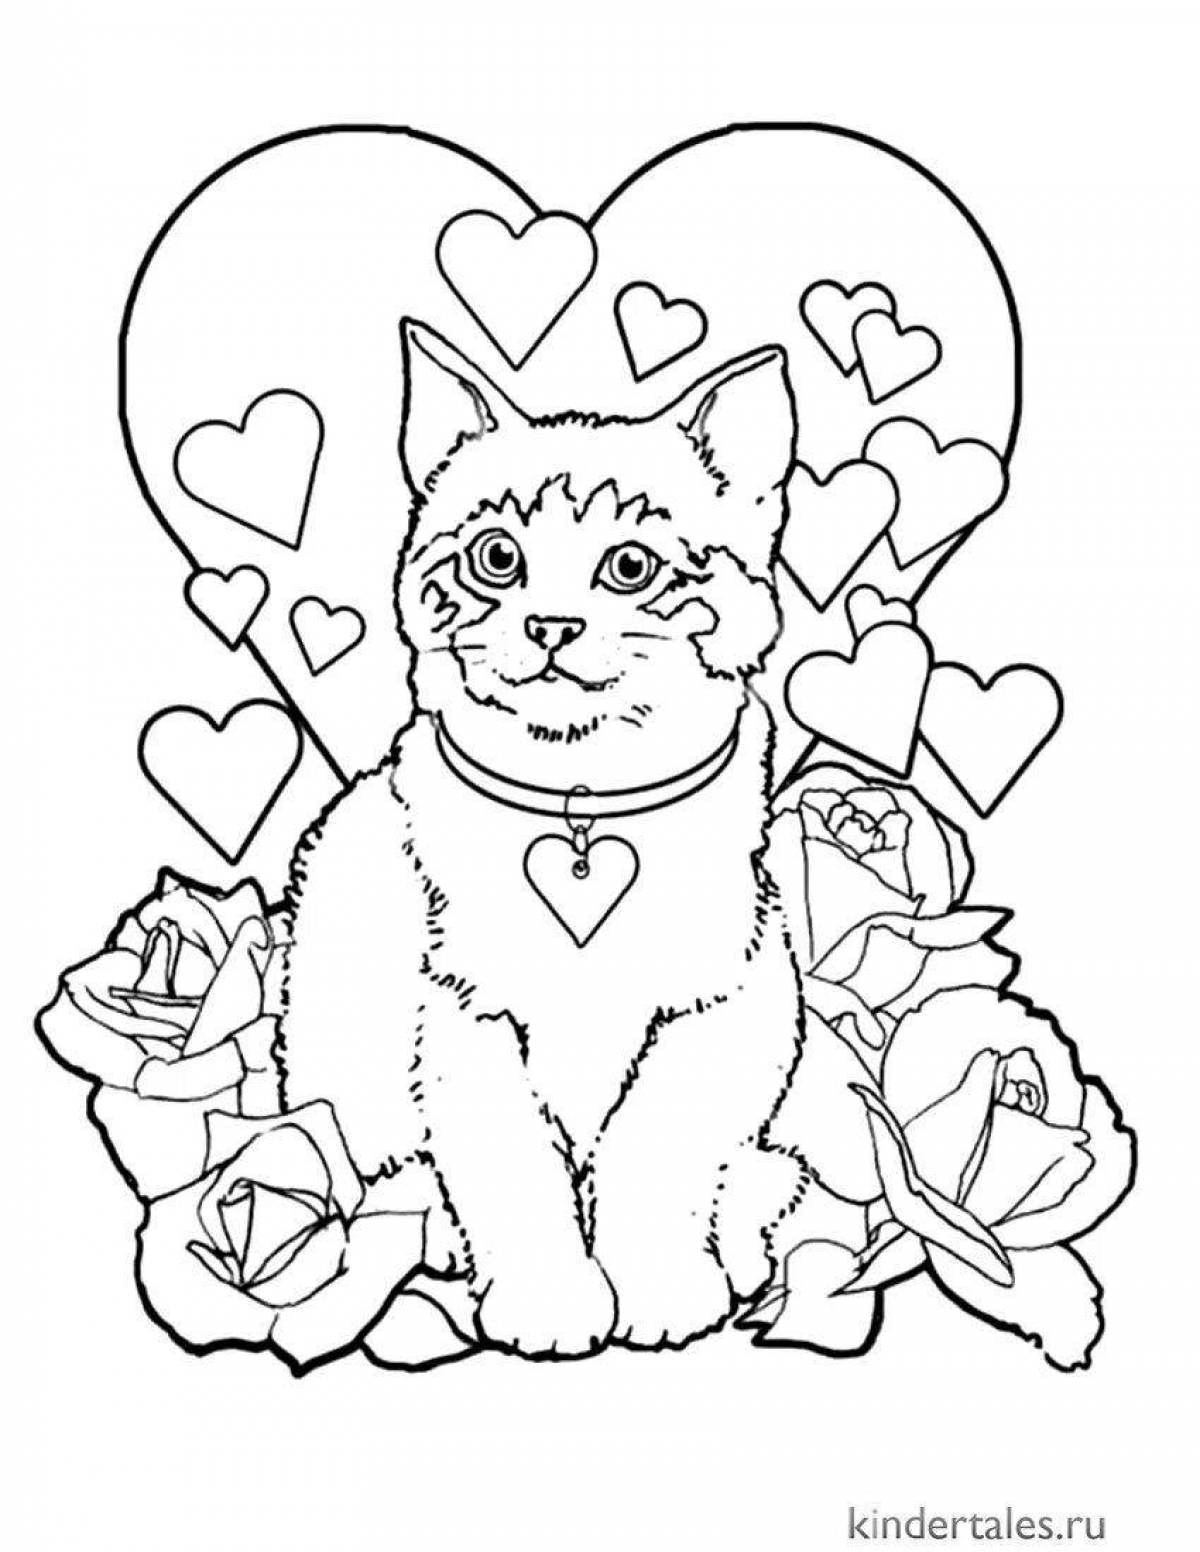 Playful valentine's day coloring book for kids